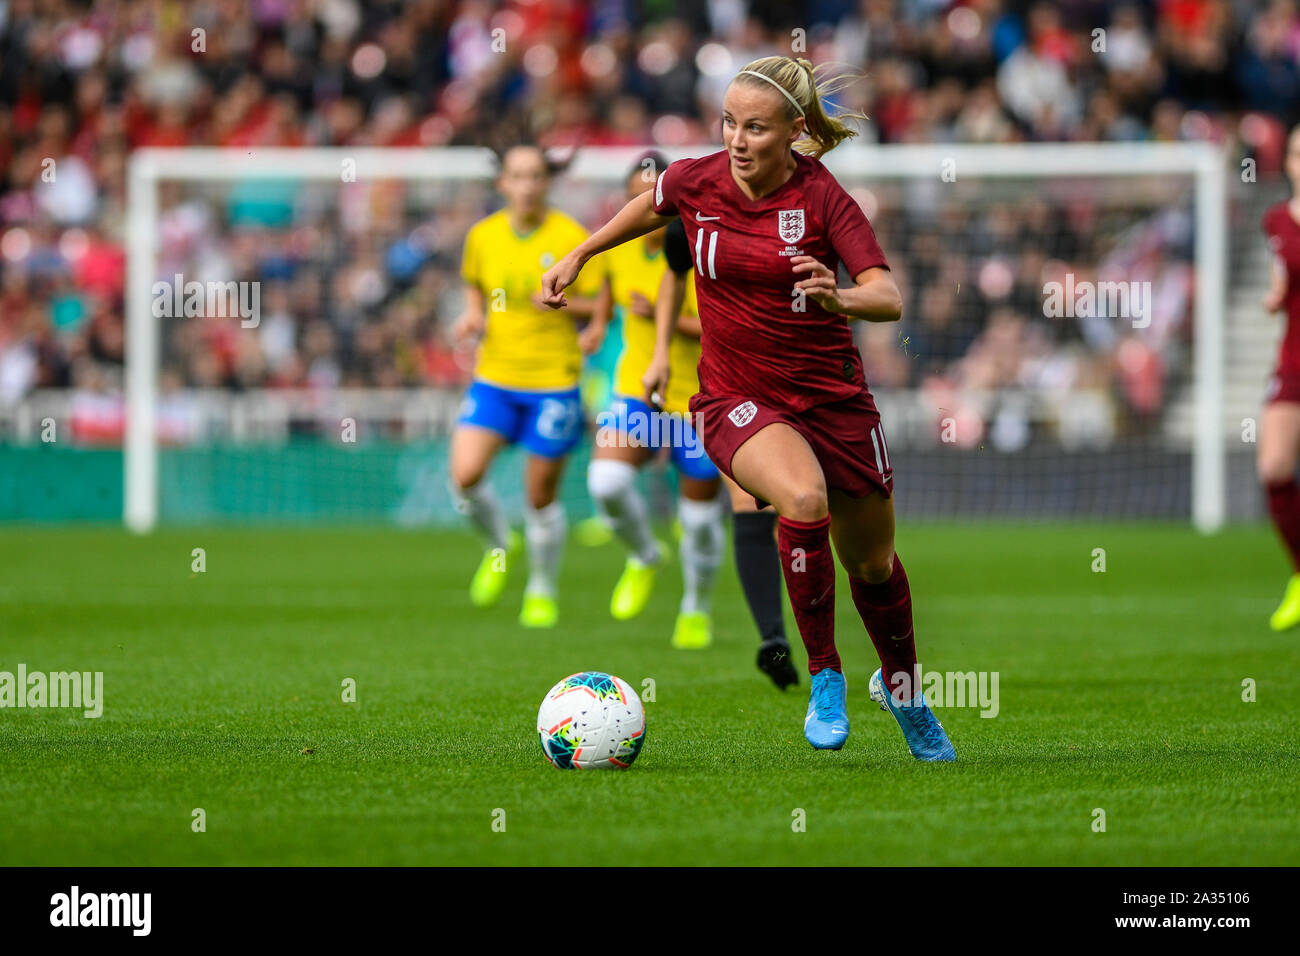 Middlesbrough, UK. 05th Oct, 2019. MIDDLESBROUGH, ENGLAND OCTOBER 5TH Beth Mead of England Women in action during the International Friendly match between England Women and Brazil Women at the Riverside Stadium, Middlesbrough on Saturday 5th October 2019.( Credit: Iam Burn | MI News) Photograph may only be used for newspaper and/or magazine editorial purposes, license required for commercial use Credit: MI News & Sport /Alamy Live News Stock Photo